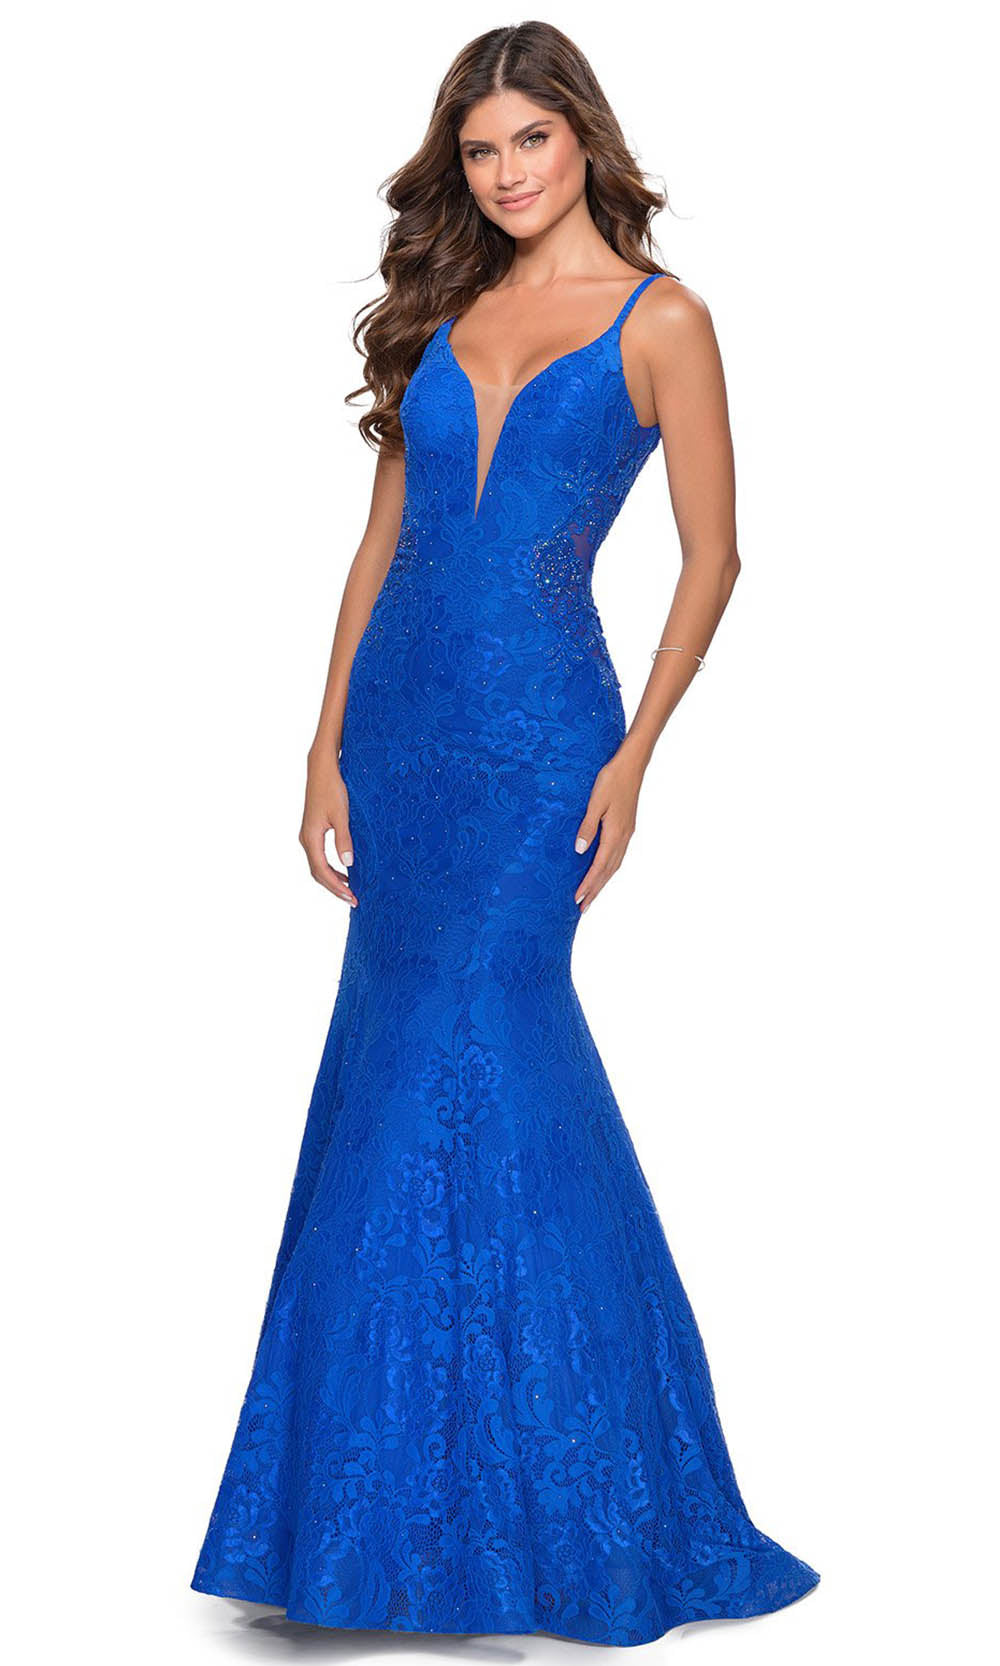 La Femme - 28355 Sparkly Lace Illusion Bodice Mermaid Gown In Blue